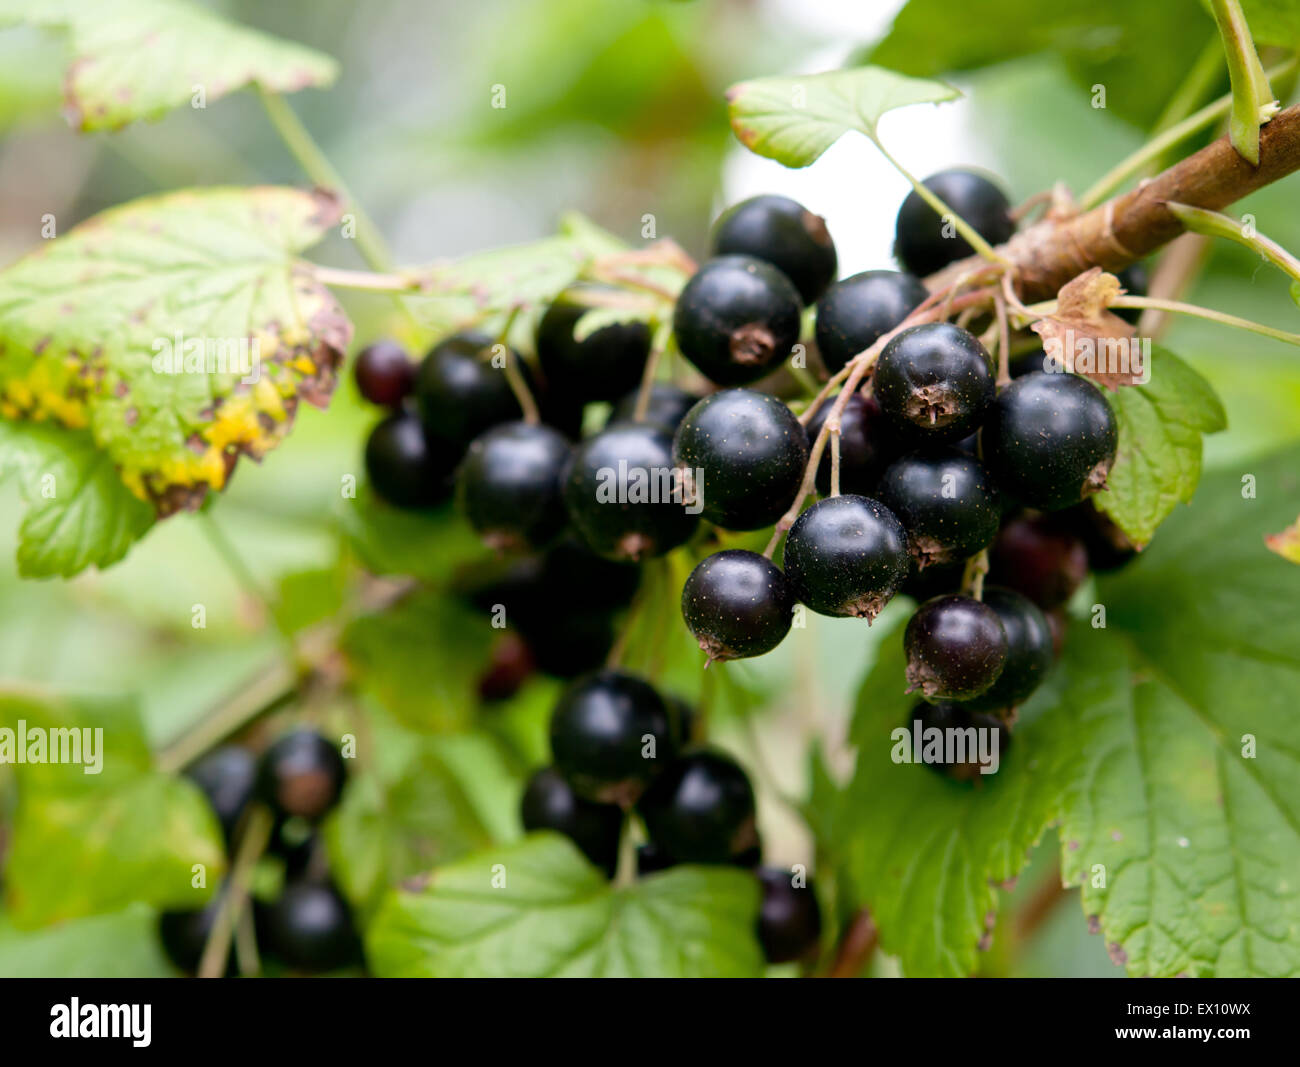 bunch of currants with a little garden Stock Photo